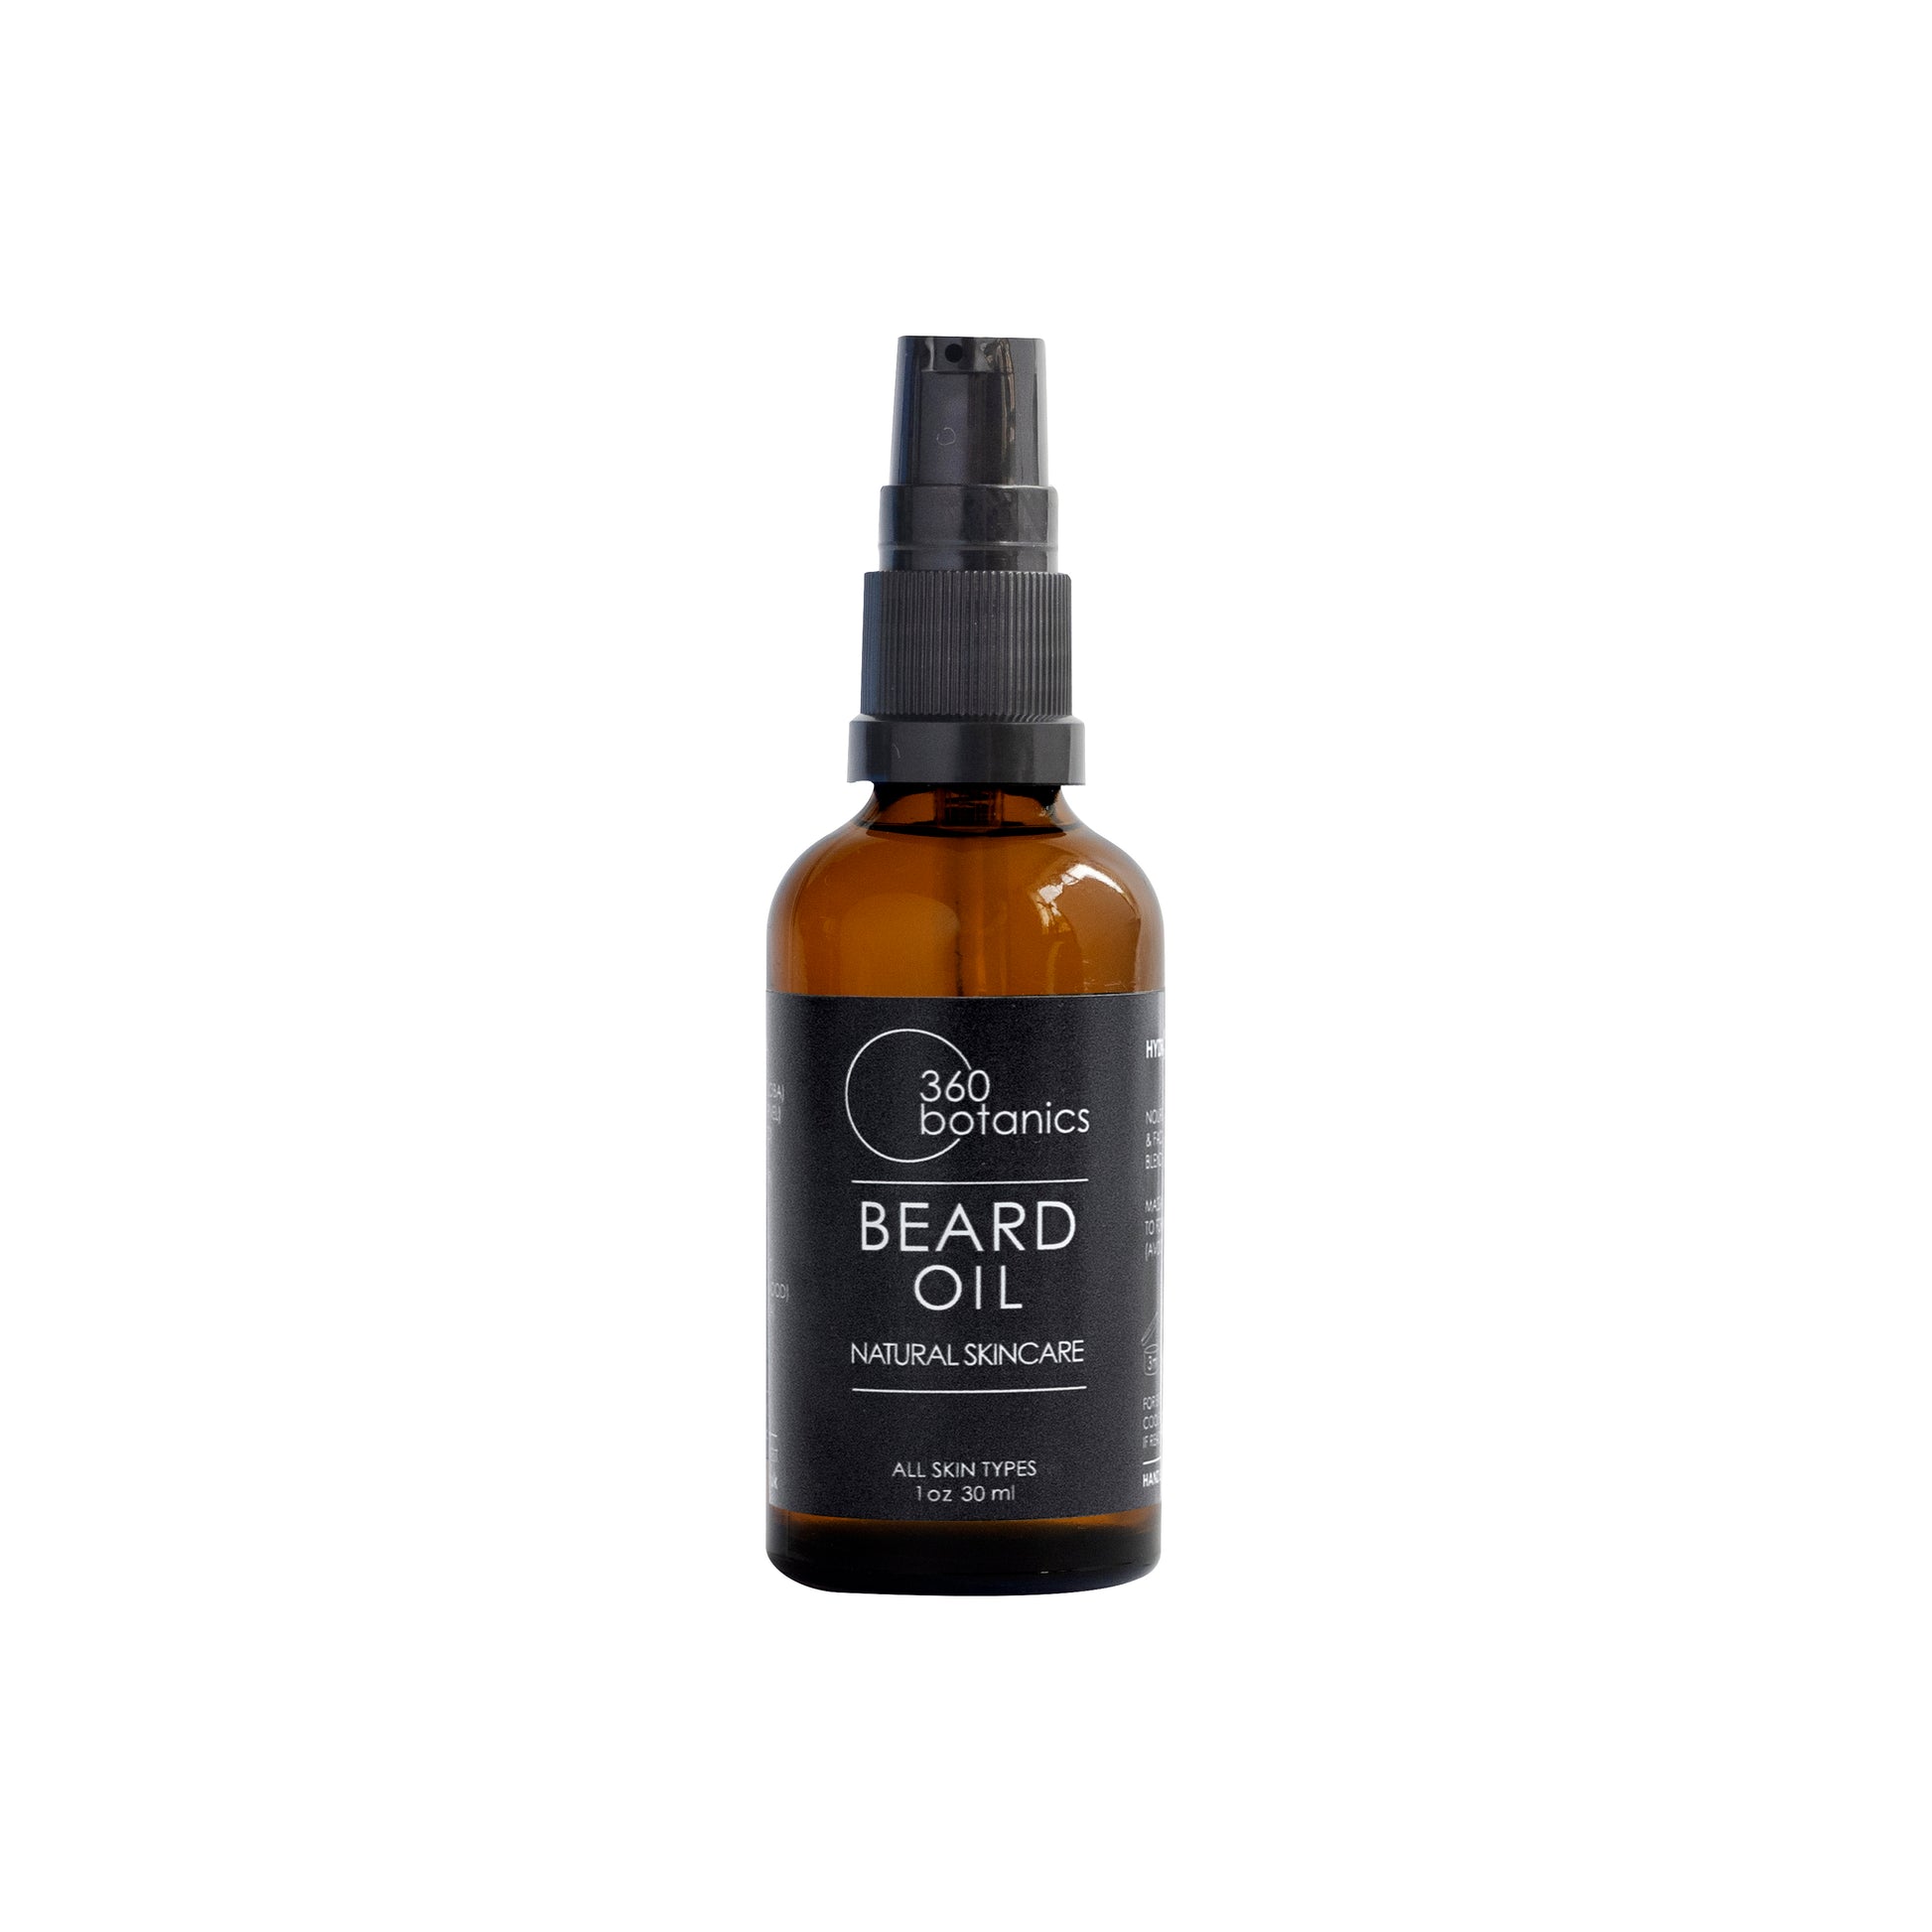 A 30 ml amber glass bottle of 360 Botanics Beard Oil with a black spray nozzle, prominently displayed against a white background. The label on the bottle indicates 'NATURAL SKINCARE' and 'ALL SKIN TYPES,' emphasizing the product's suitability for a wide range of users and its natural ingredients